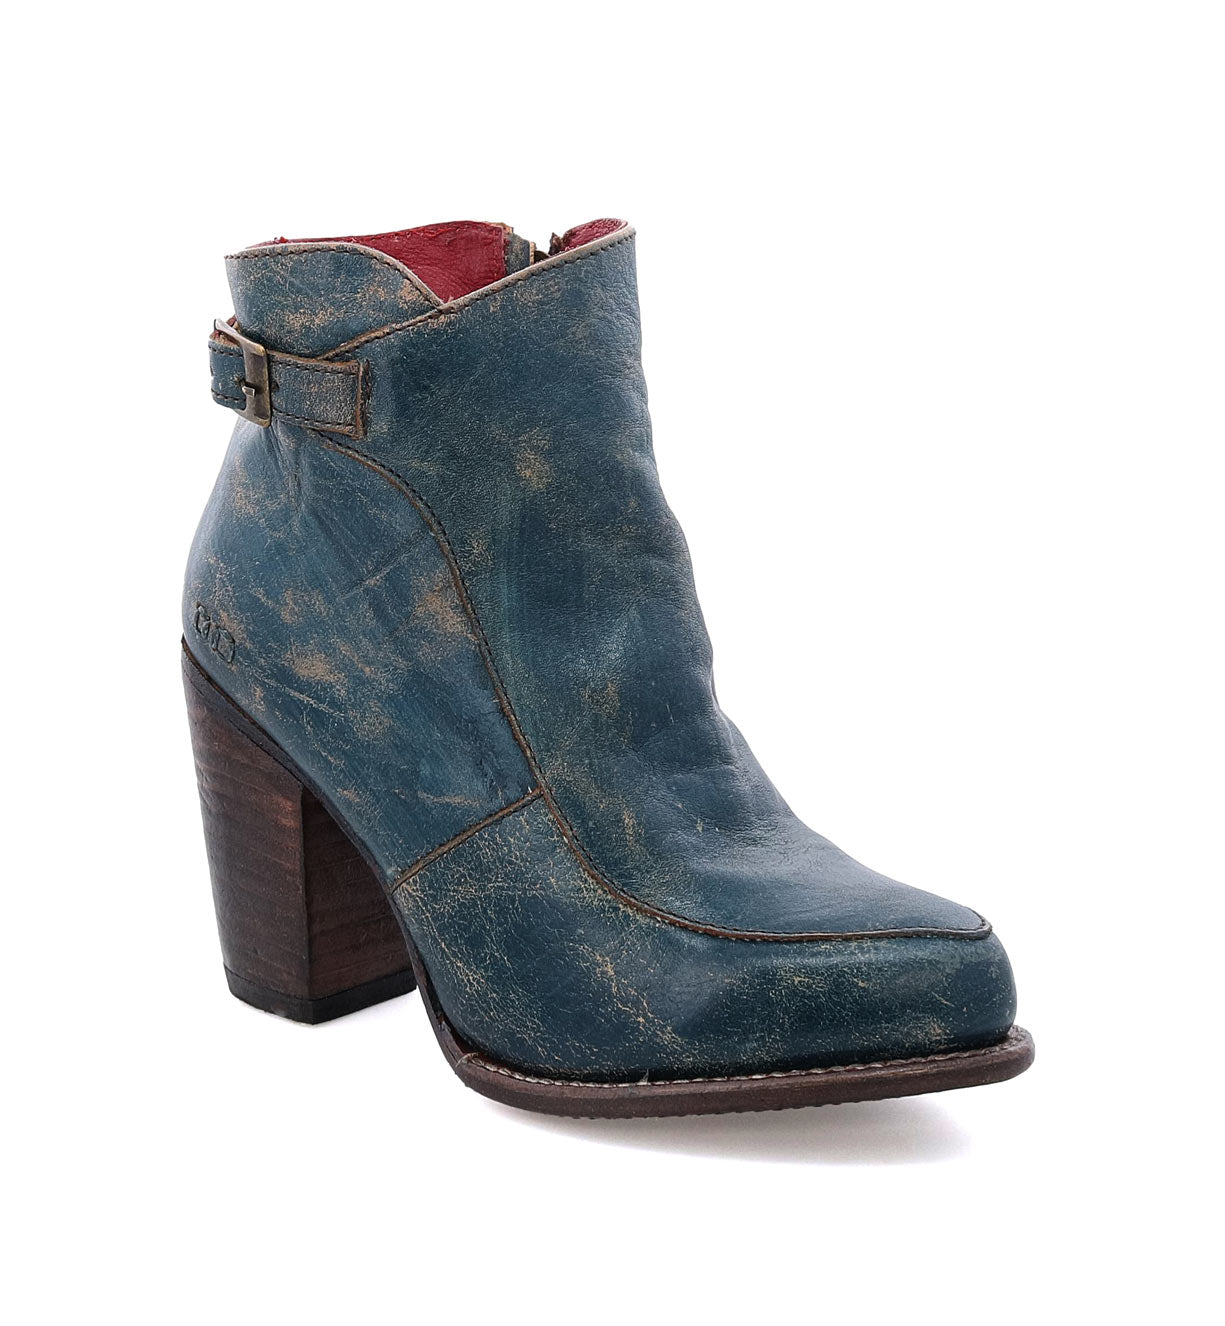 A women's Isla blue leather ankle boot by Bed Stu with a wooden heel.